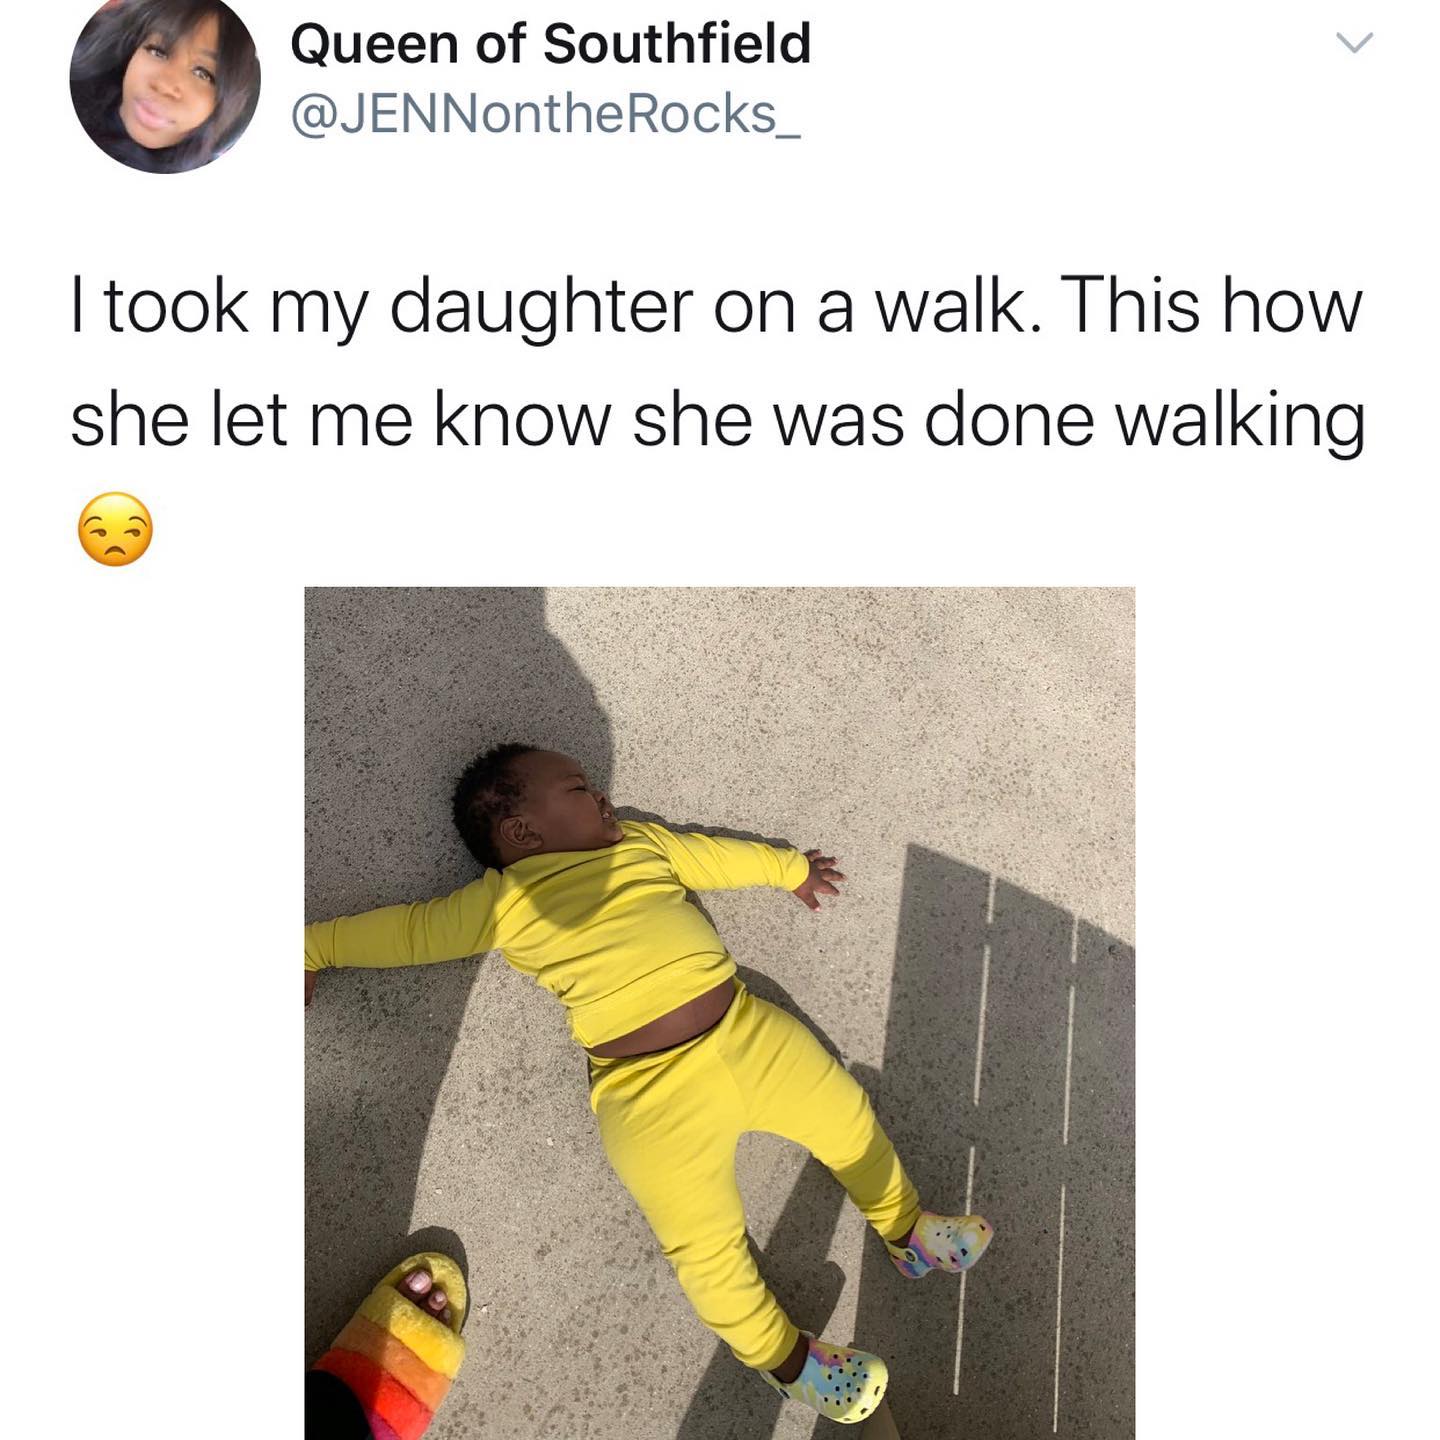 dank memes - twitter - material - Queen of Southfield I took my daughter on a walk. This how she let me know she was done walking